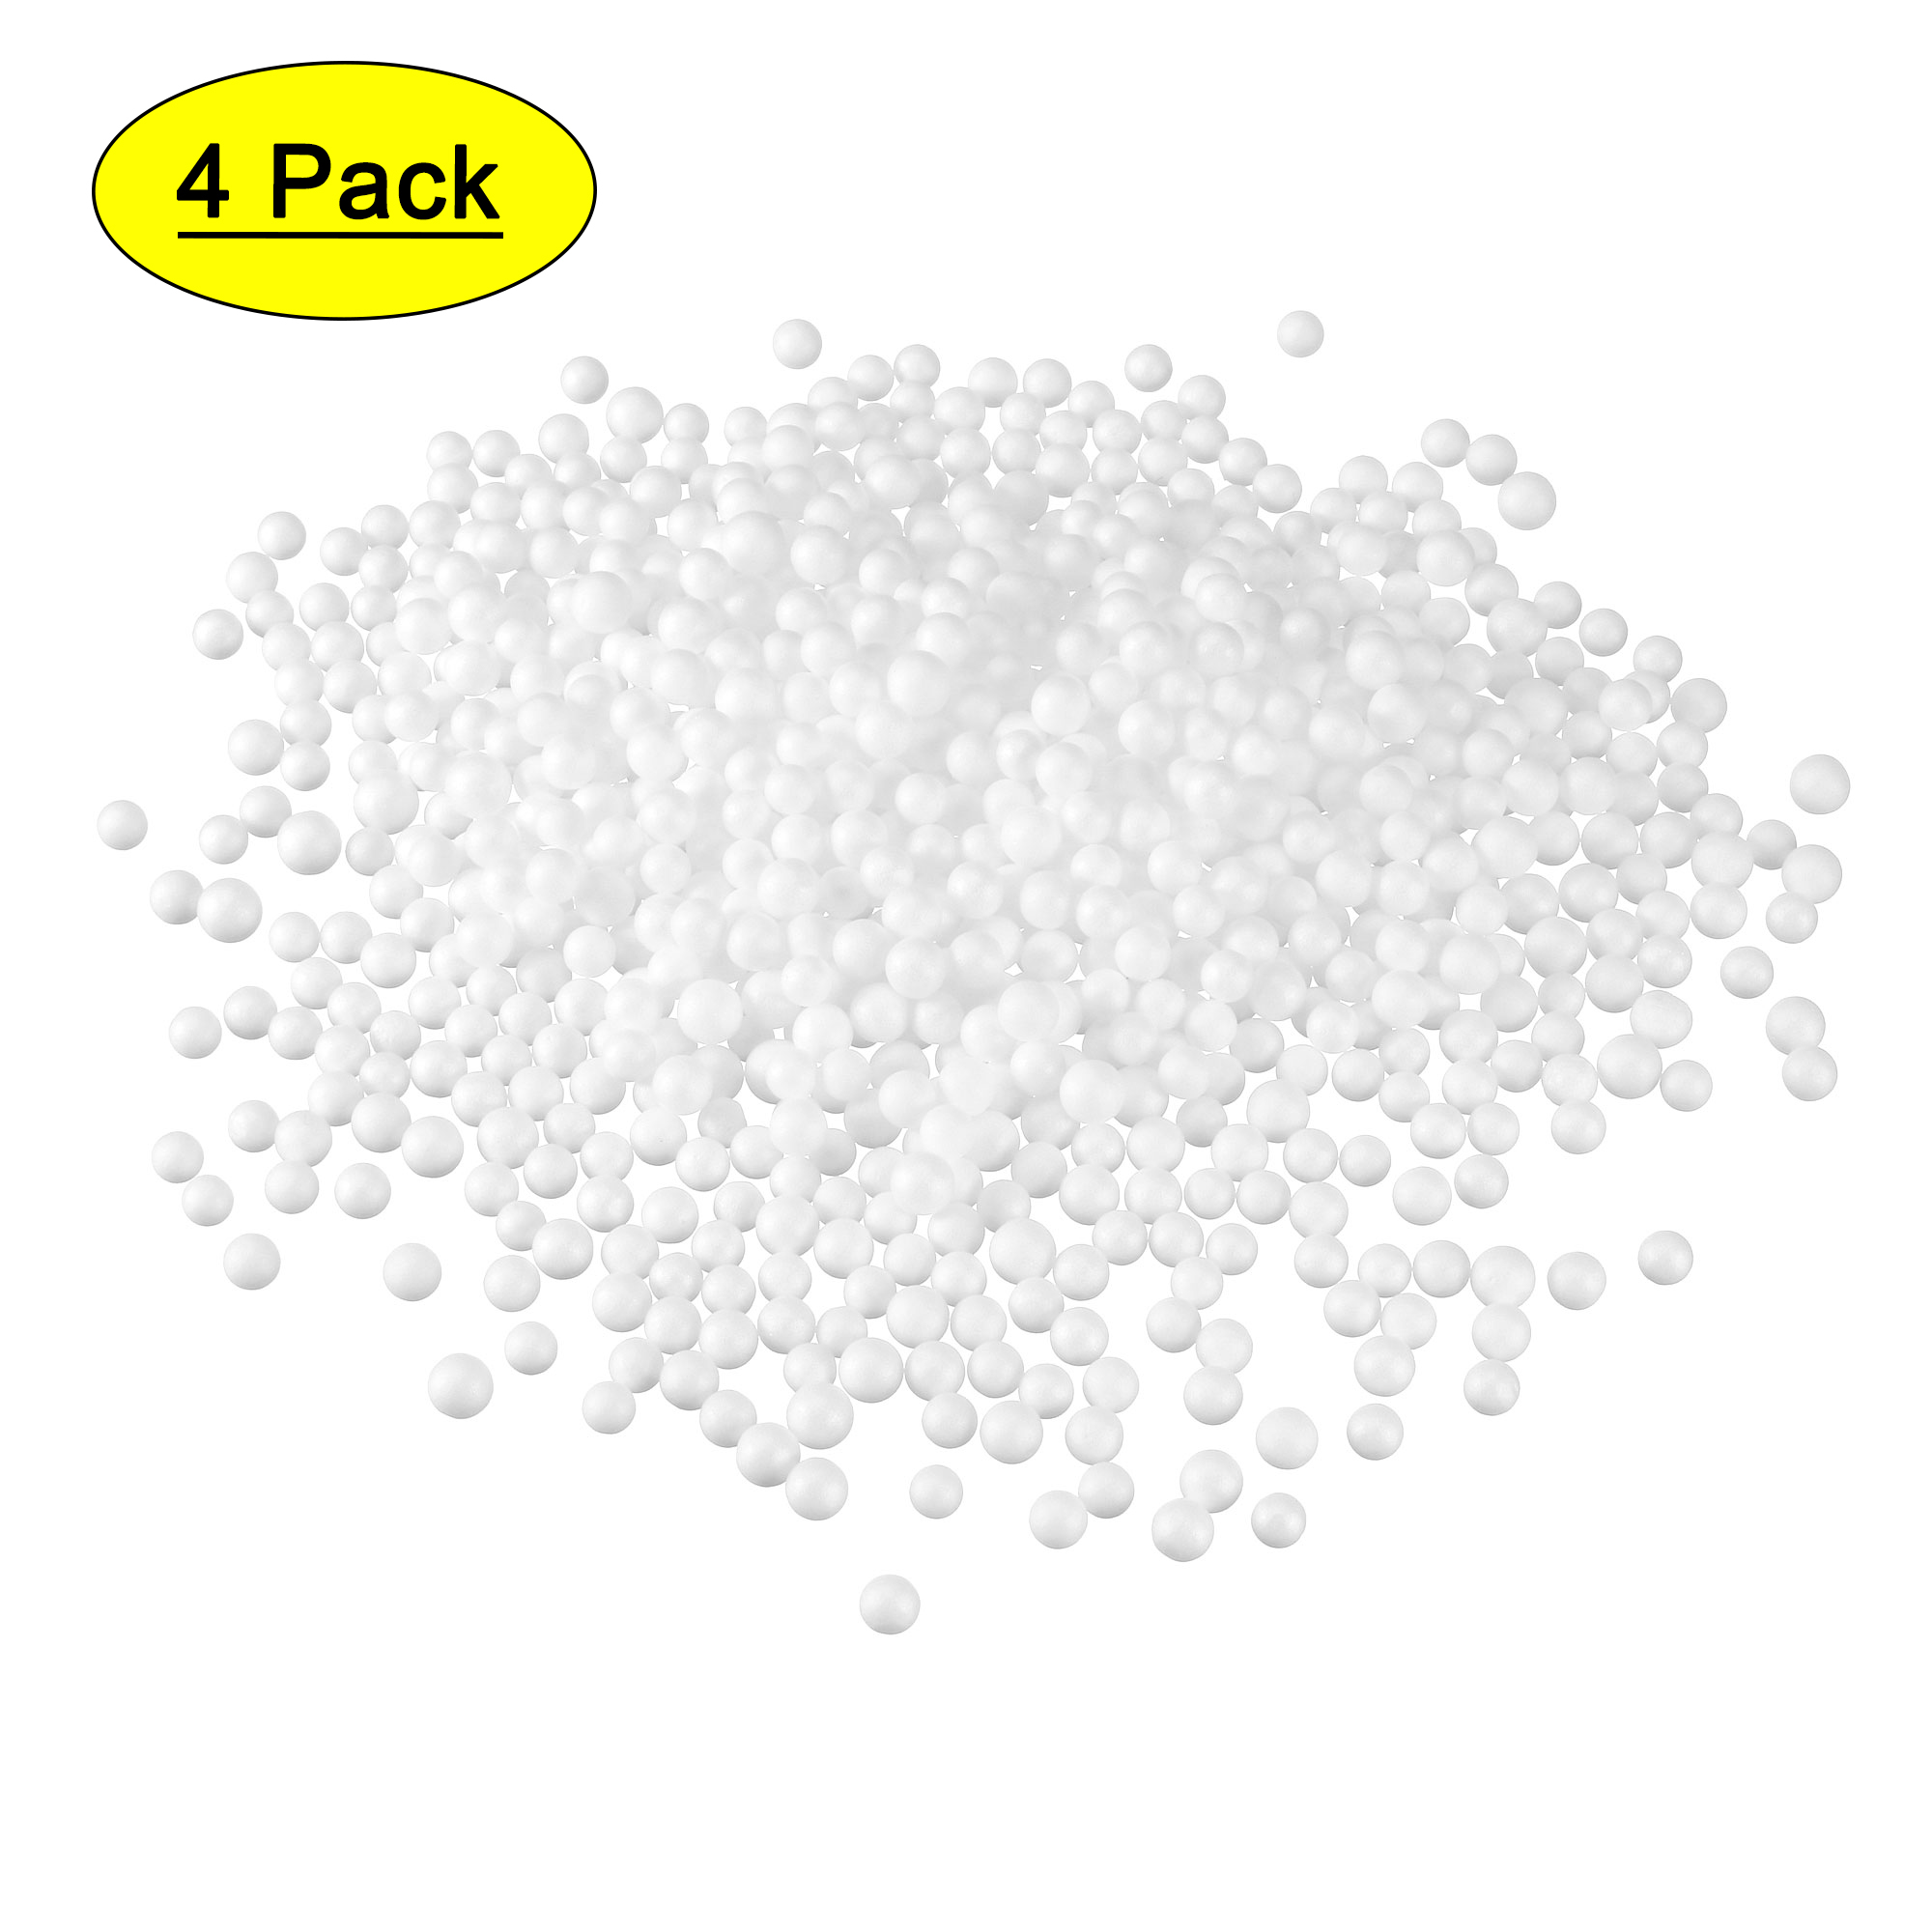 Uxcell White Polystyrene Foam Beads Ball for Crafts and Fillings 0.1 inch 4 Pack